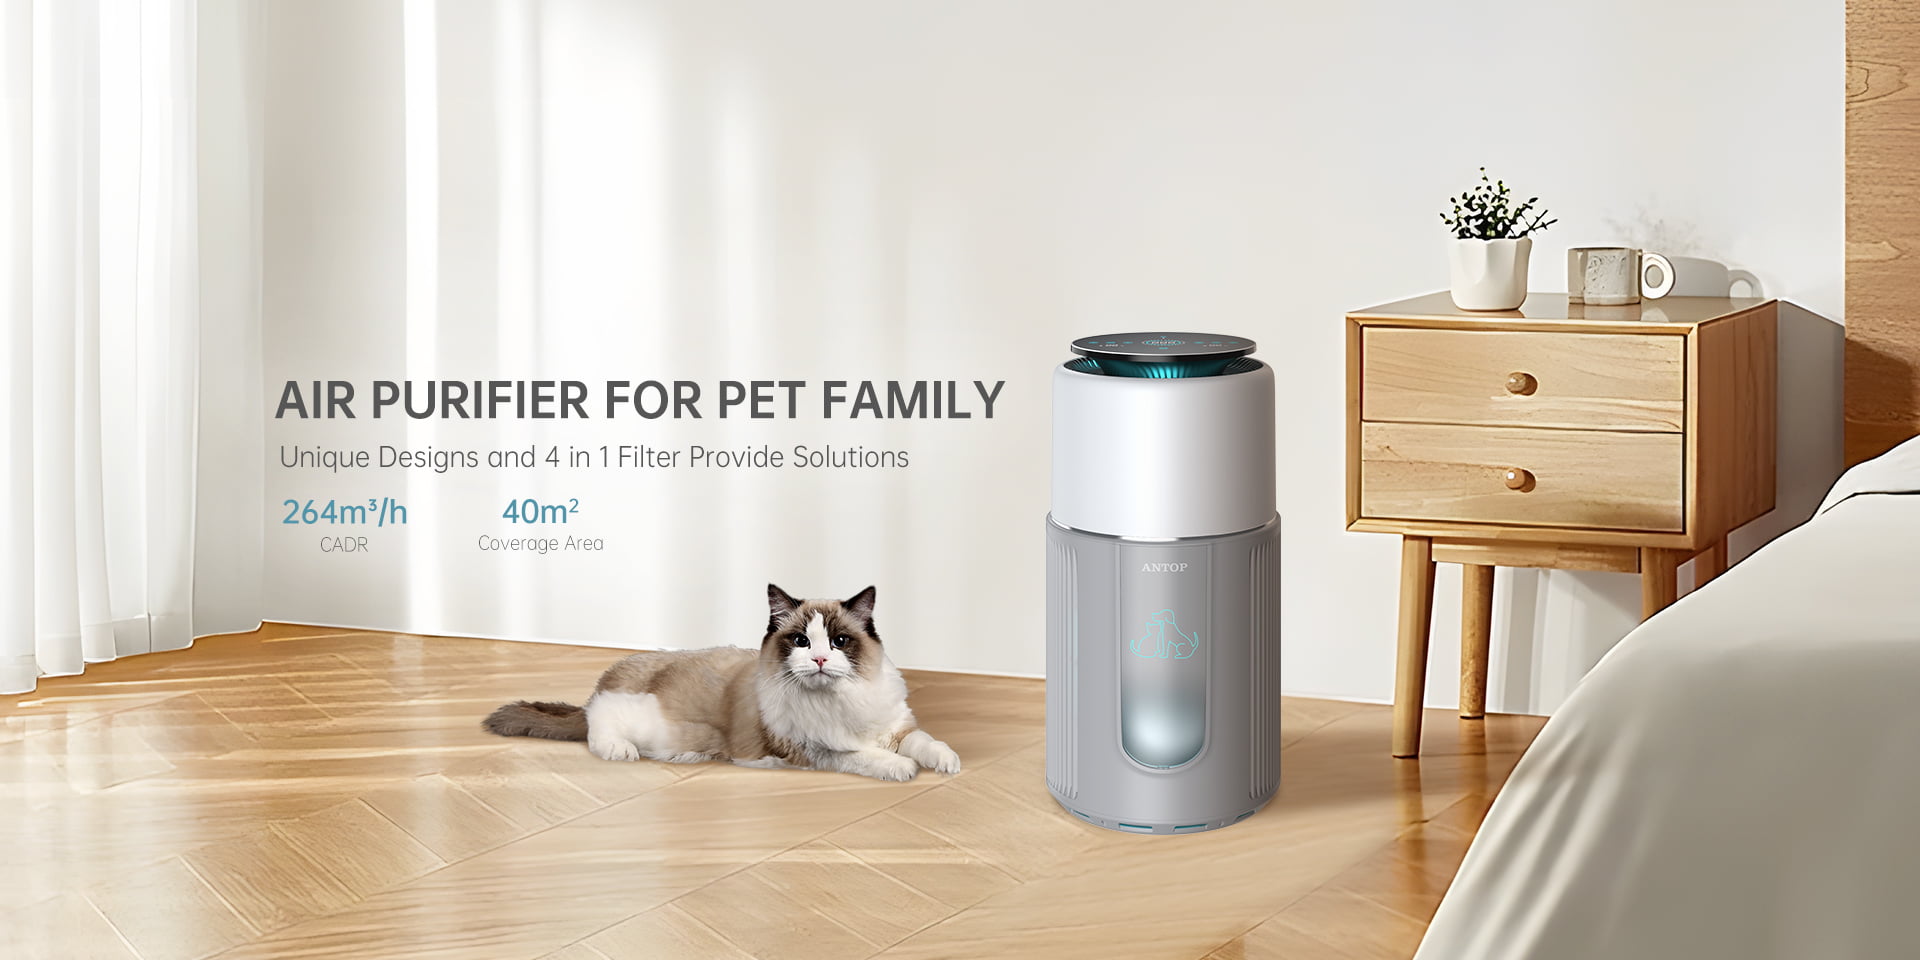 Air Purifier for Pet Family Unique Designs and 4 in 1 Filter Provide Solutions